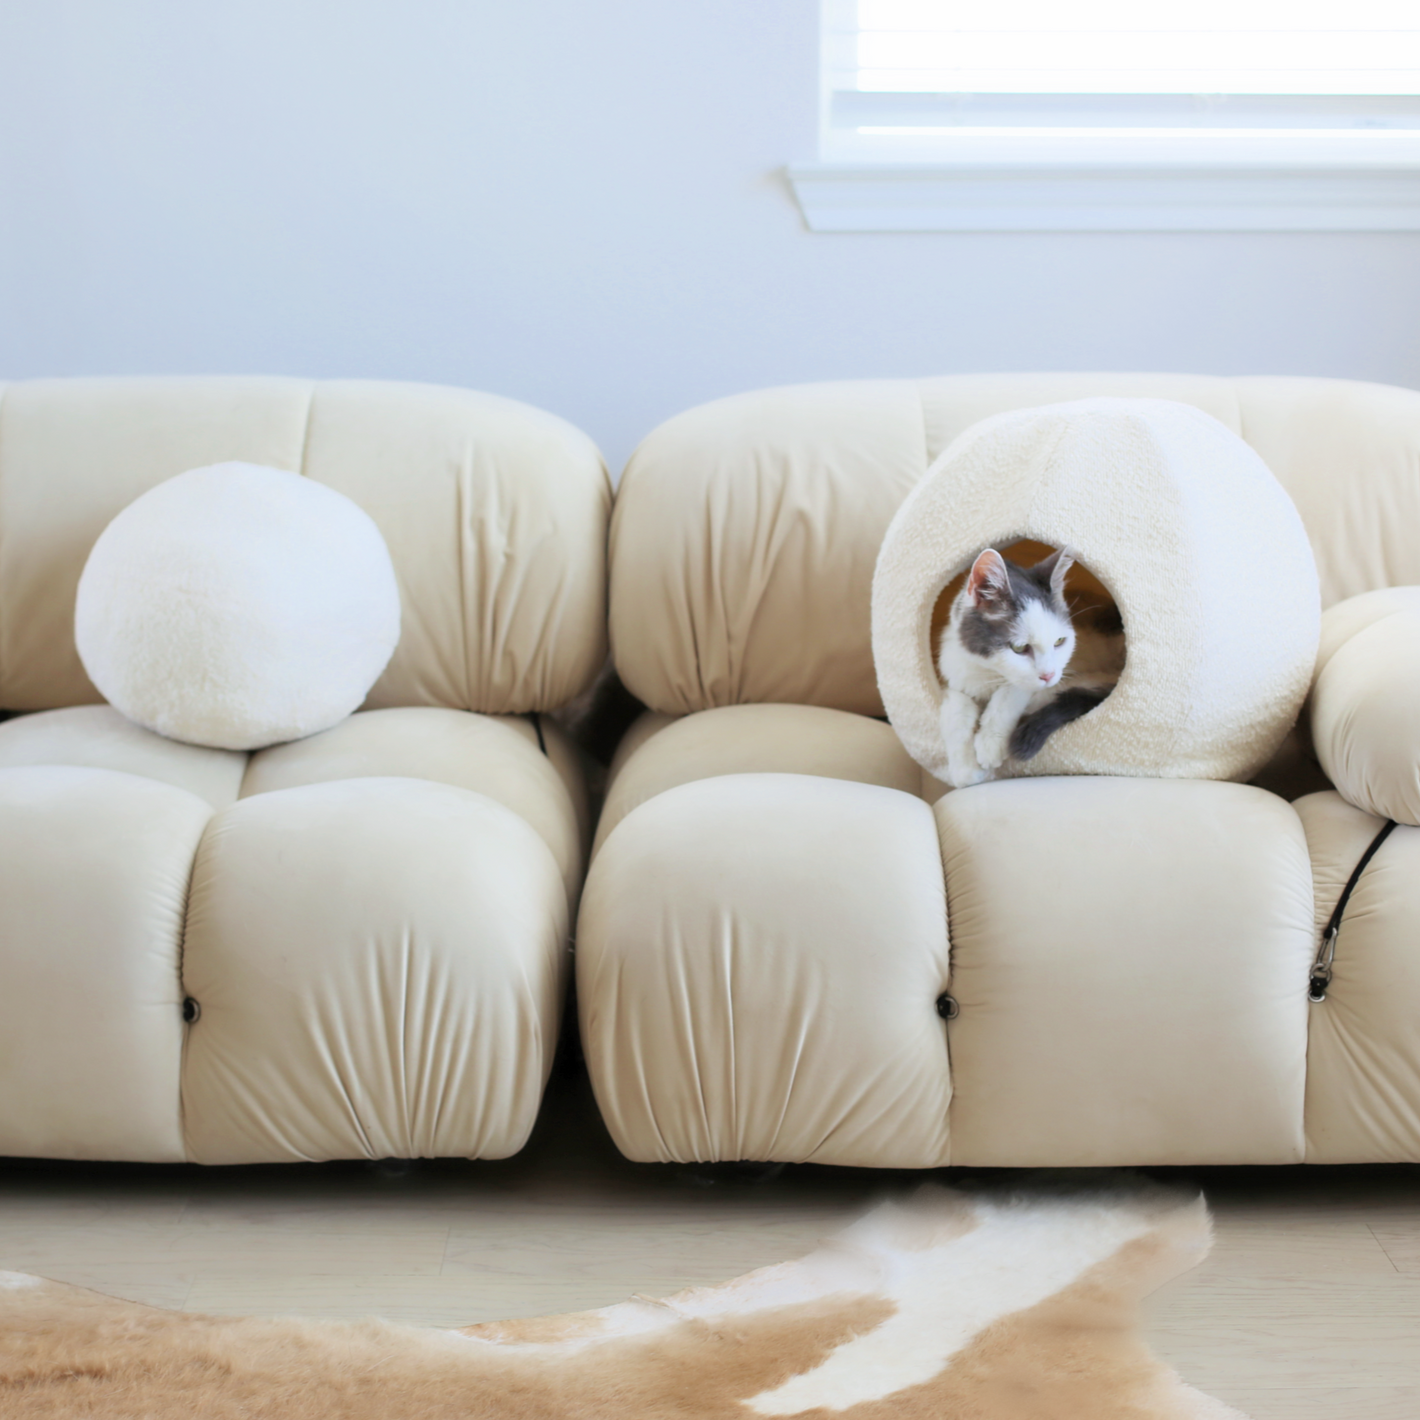 moon cat cave bed best cat bed cave with matching boucle round sphere cushion pillow on camaleonda mario bellini couch living room by catenary home is like a cat igloo, cat nest and cat hideaway all in one